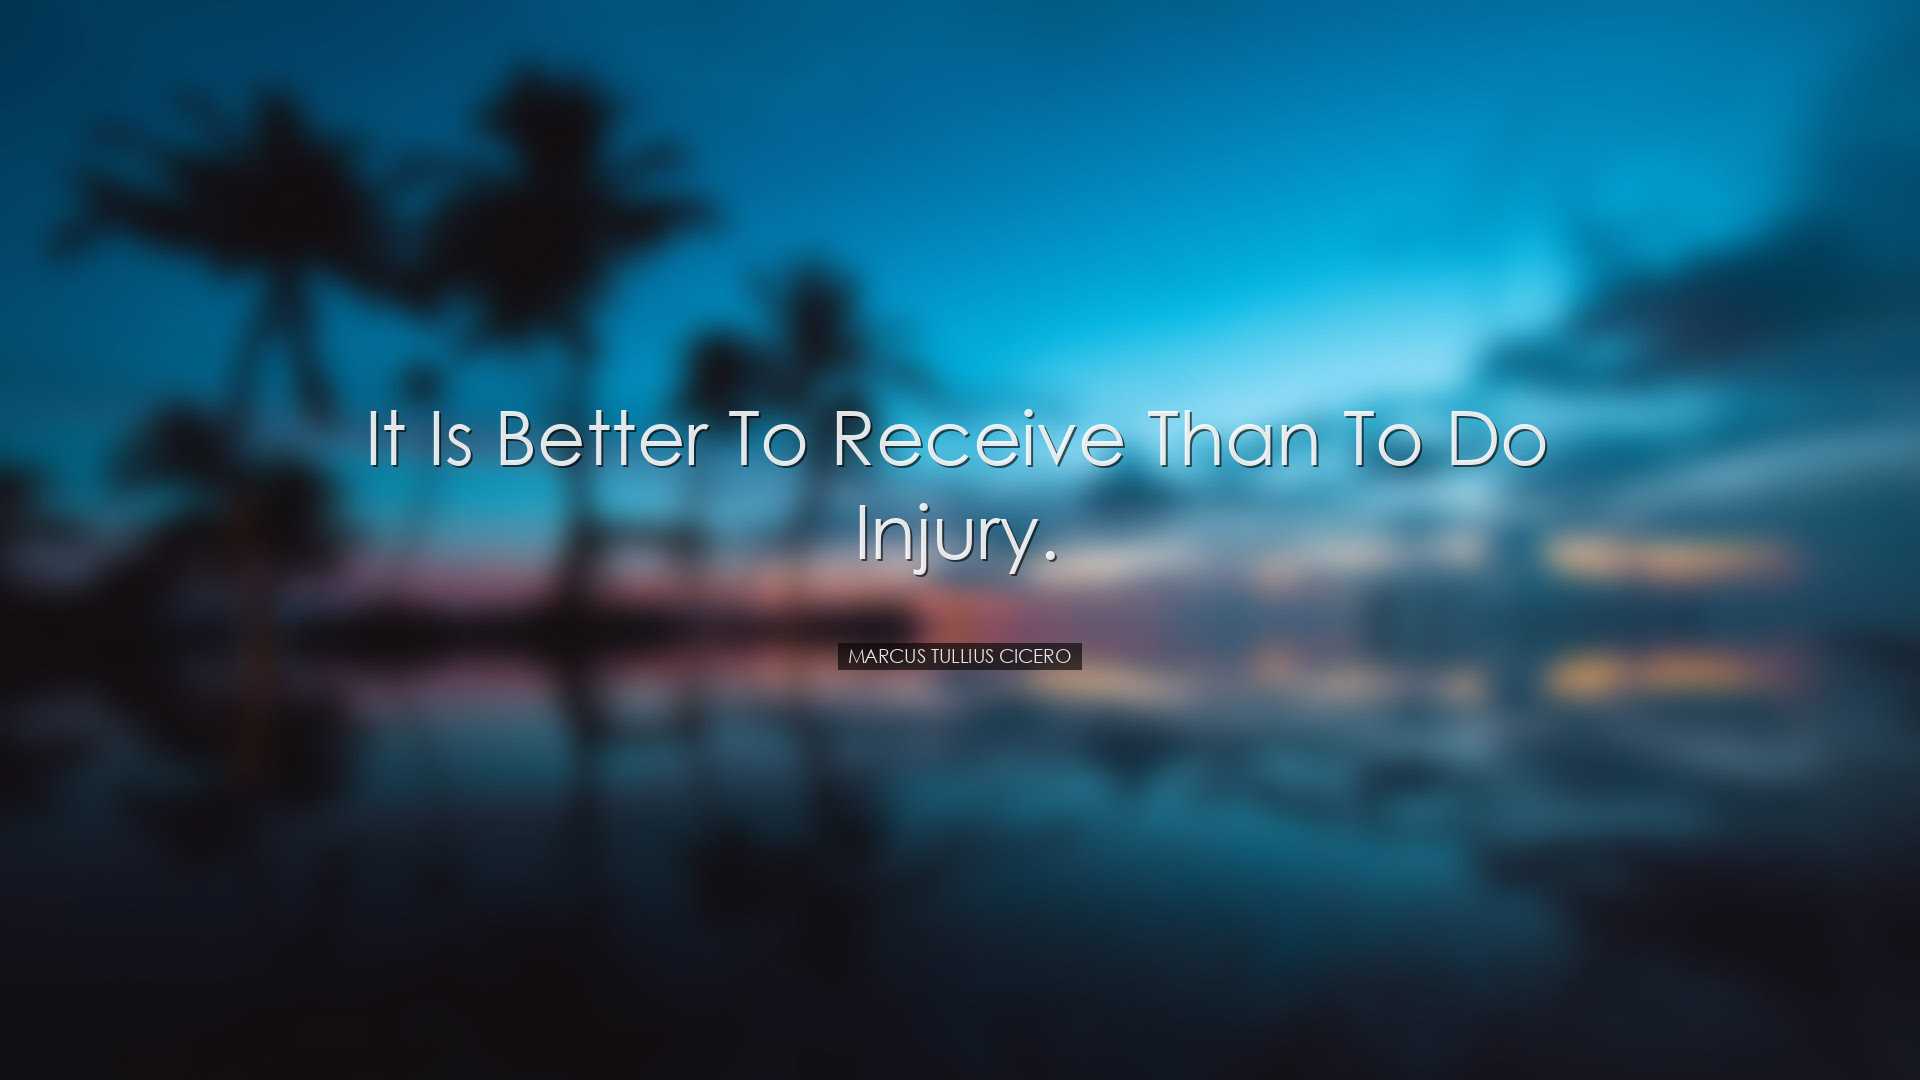 It is better to receive than to do injury. - Marcus Tullius Cicero